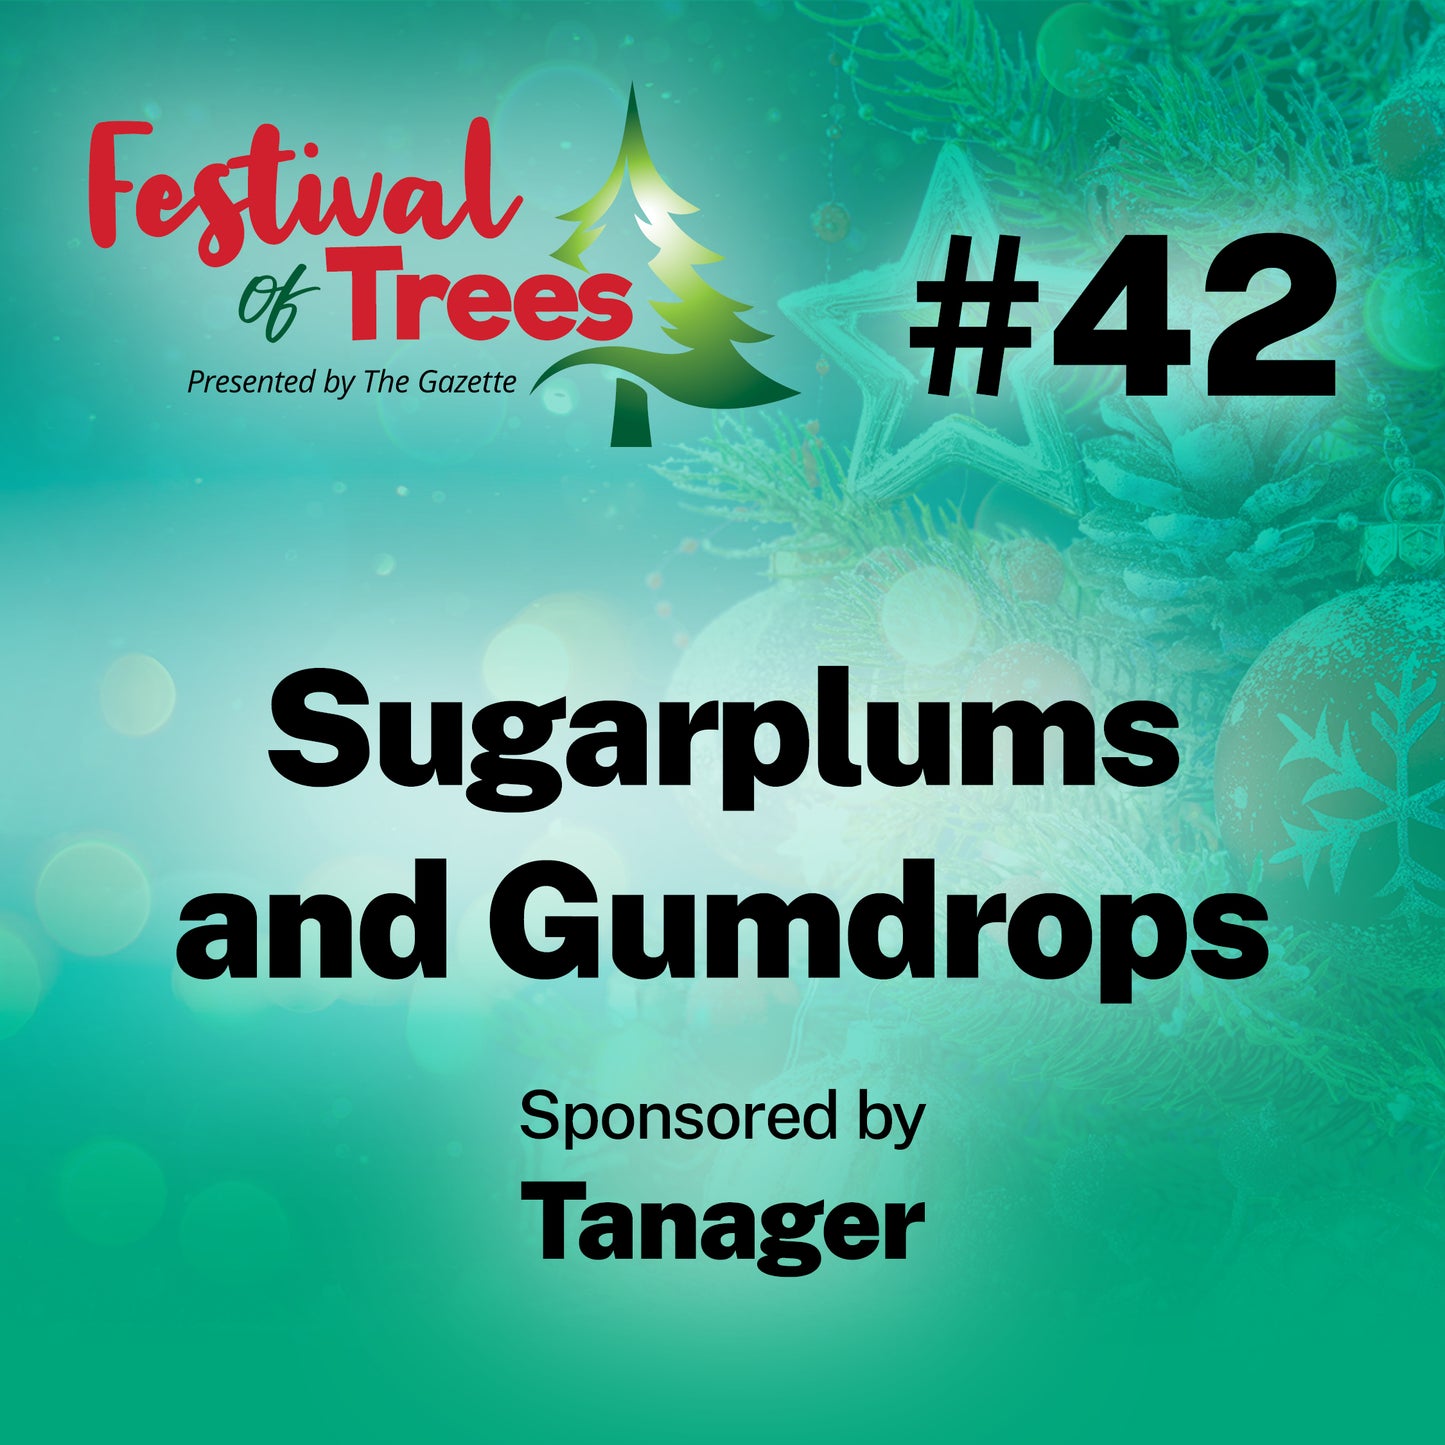 7ft. Tree #42: Sugarplums and Gumdrops